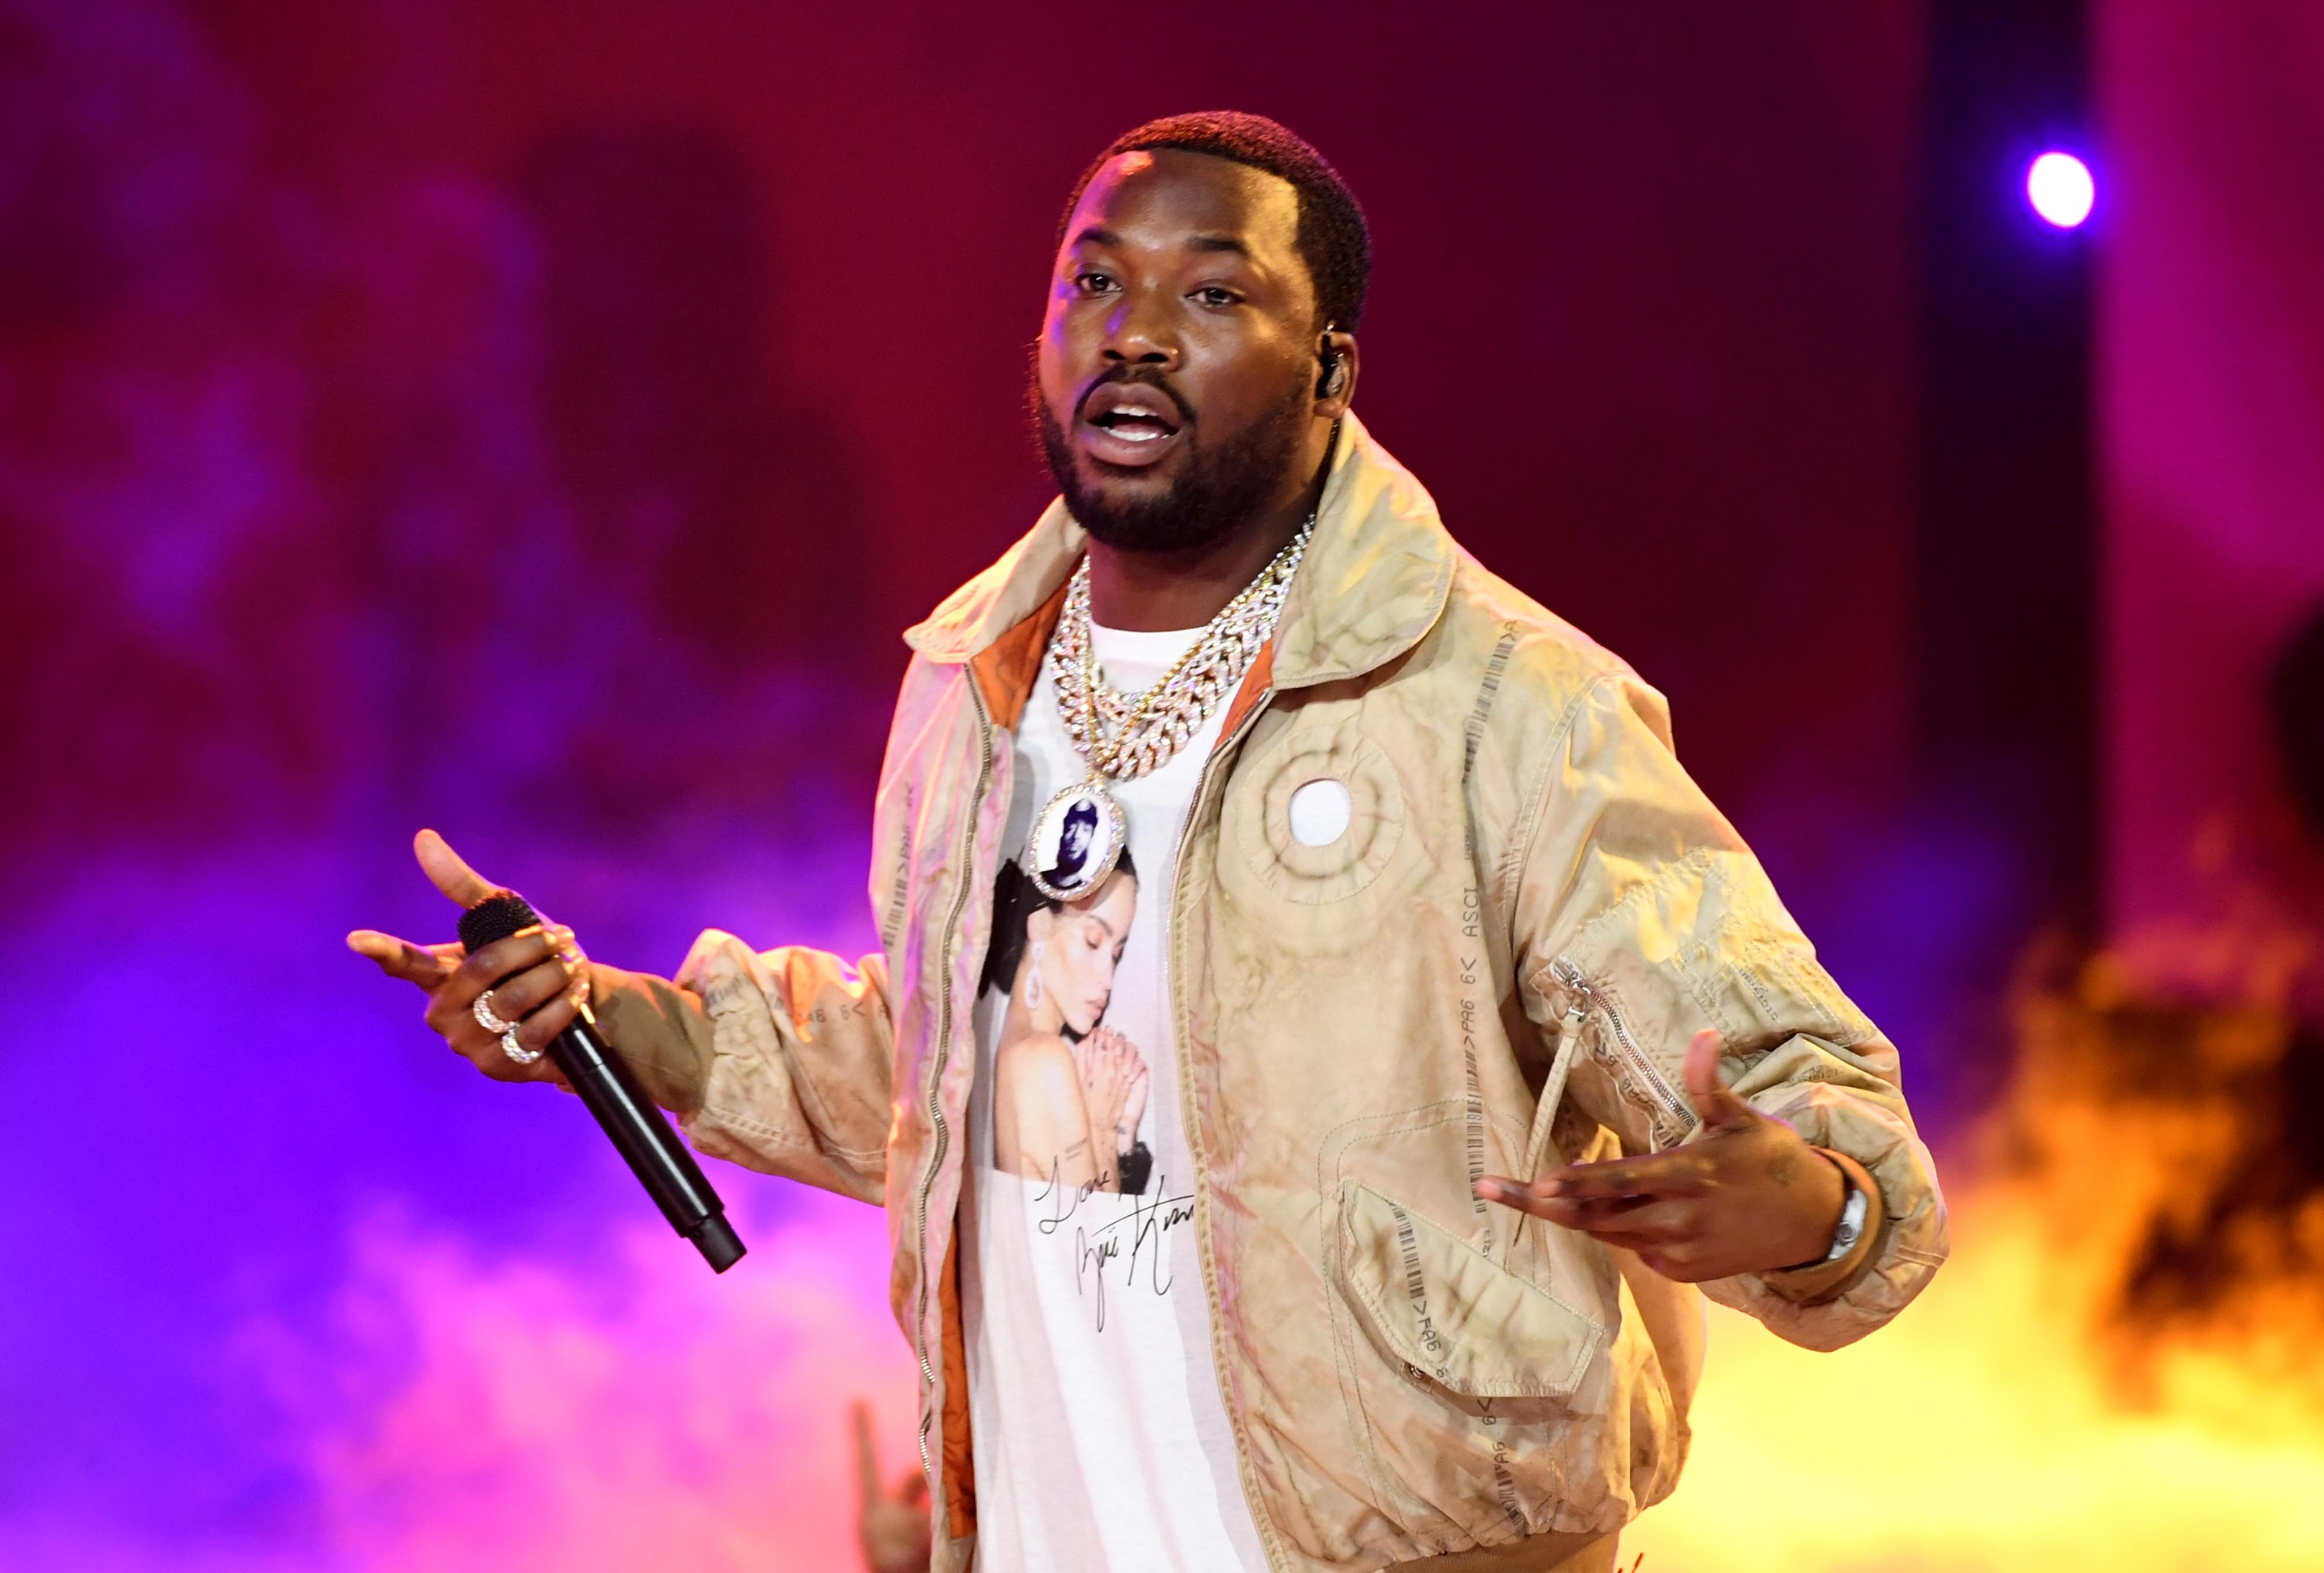 Meek Mill Wants to Expose Companies for ‘Offering Slave Deals’ to Aspiring Artists